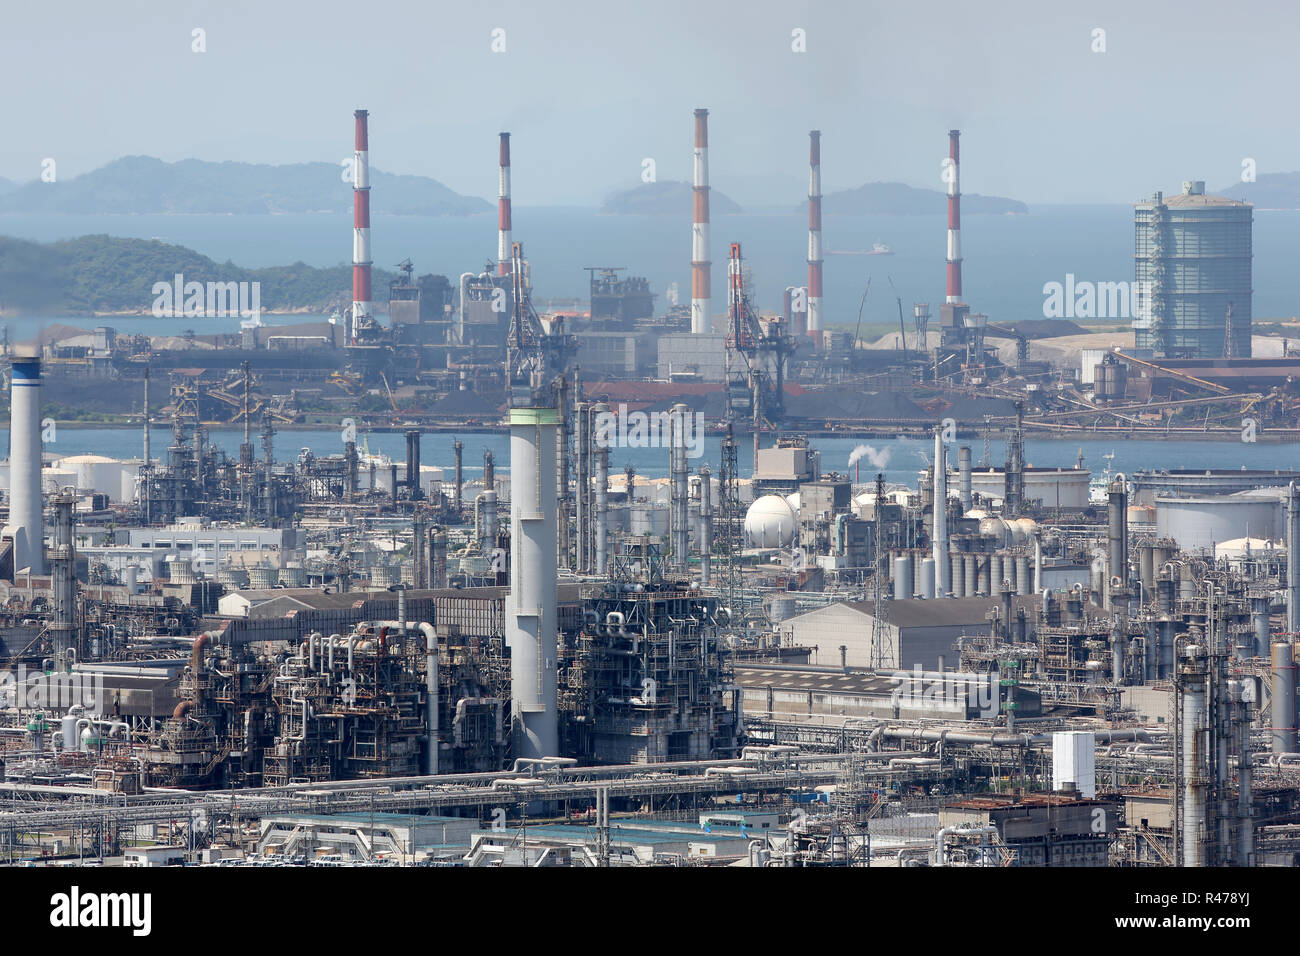 refinery plant with smoke stacks, industrial site Stock Photo